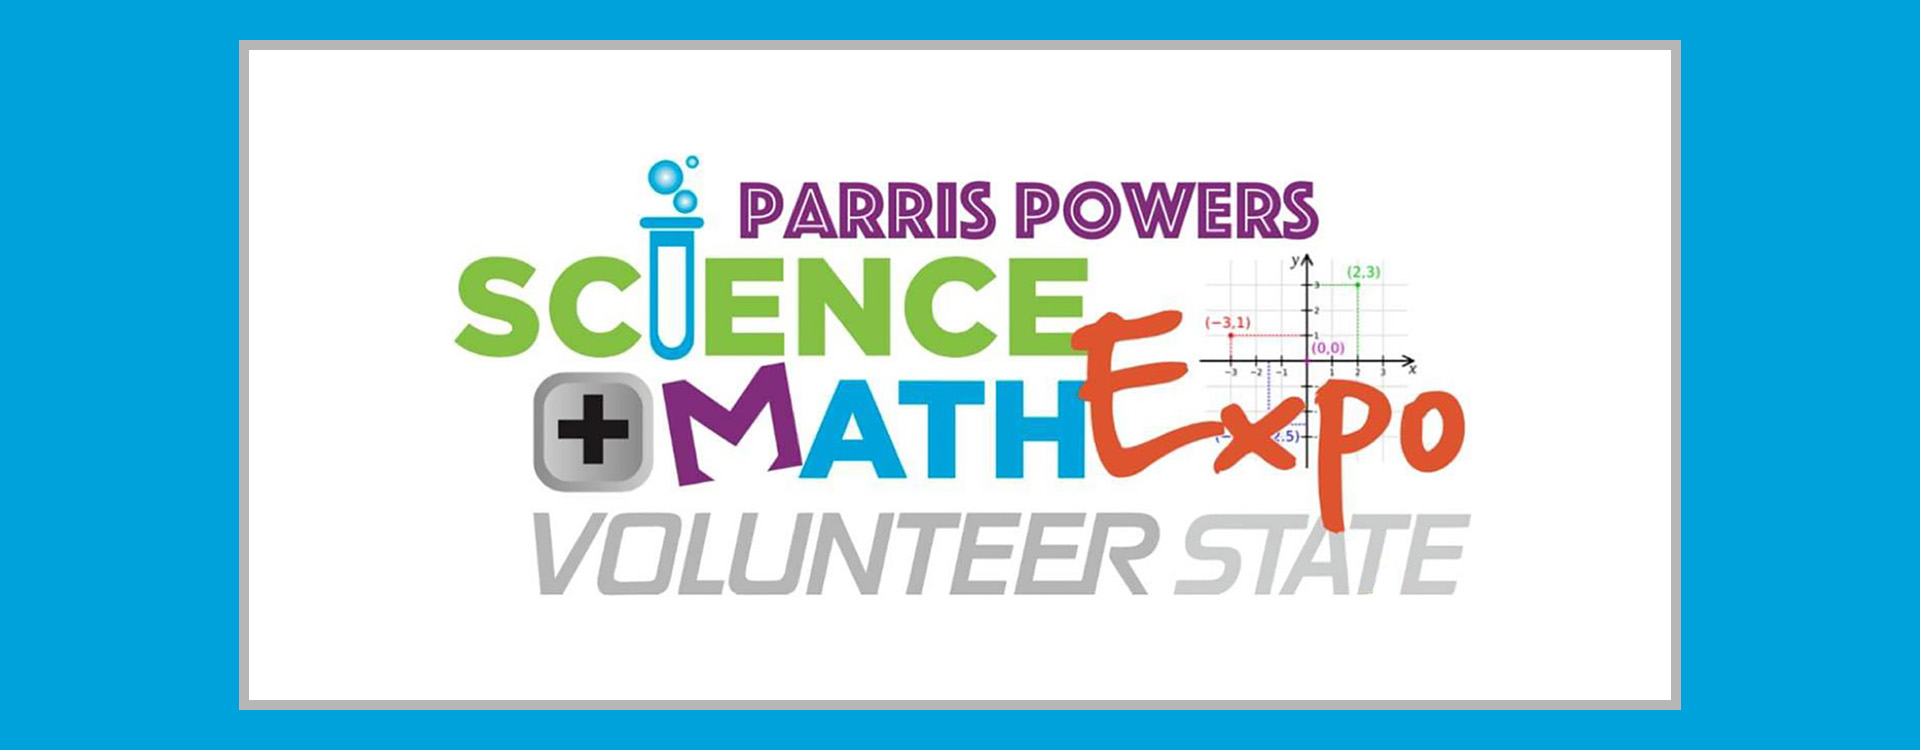 Parris Powers Science & Math Expo